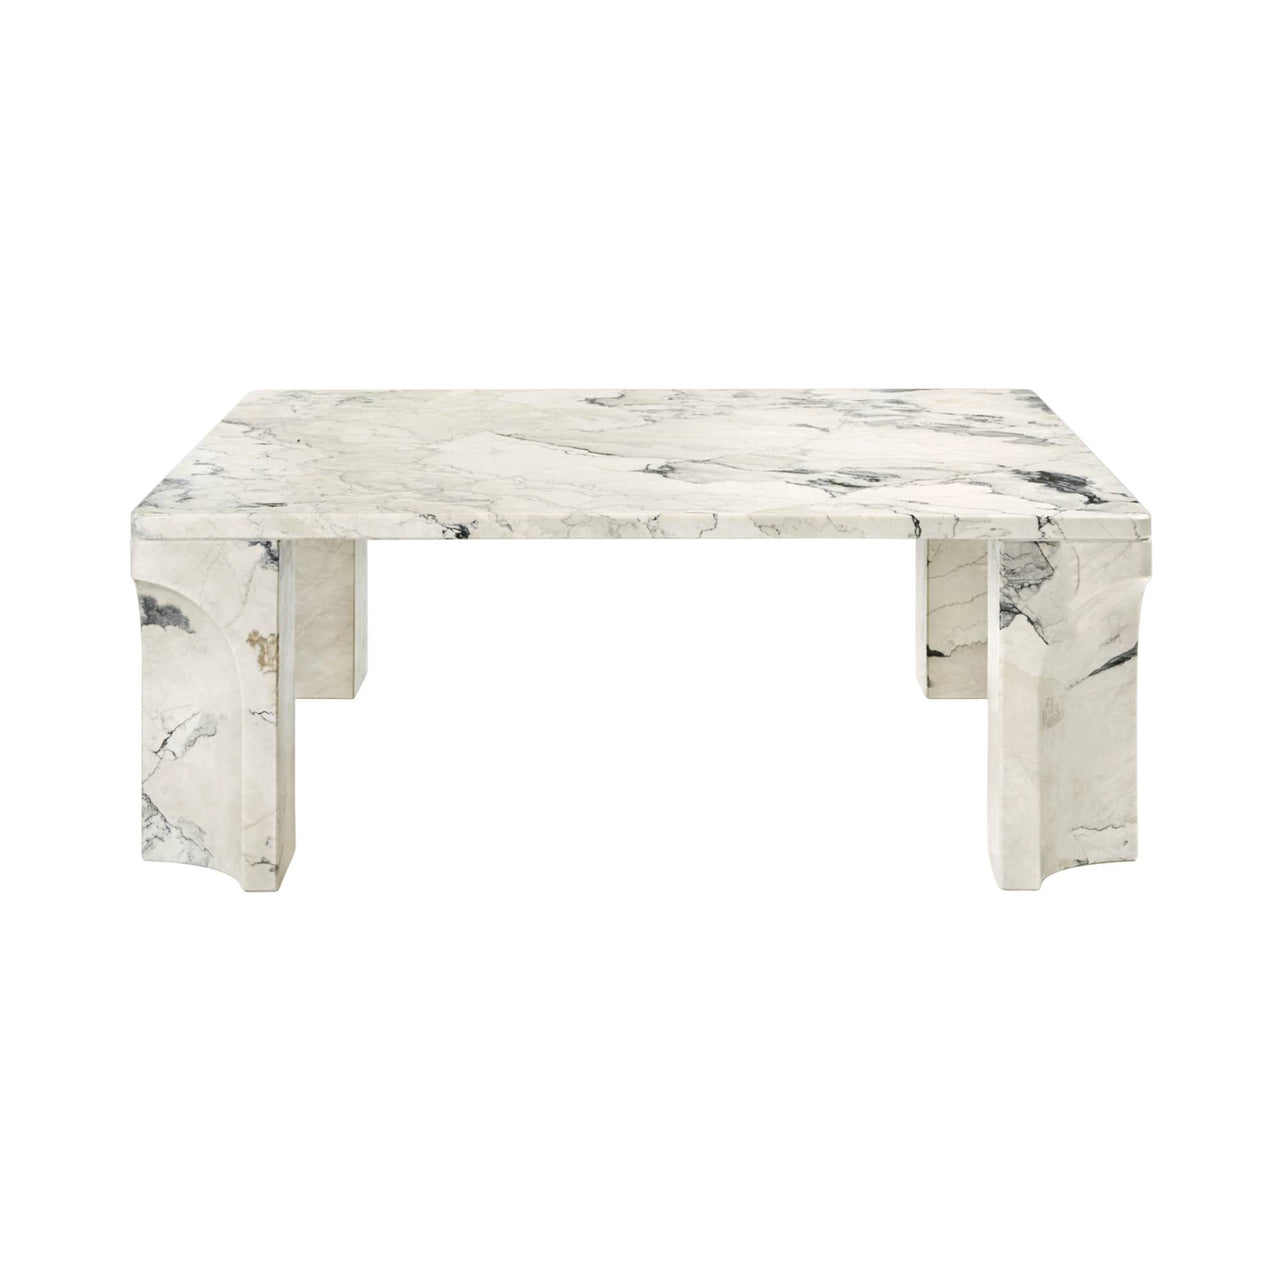 Doric Coffee Table: Square + Electric Grey